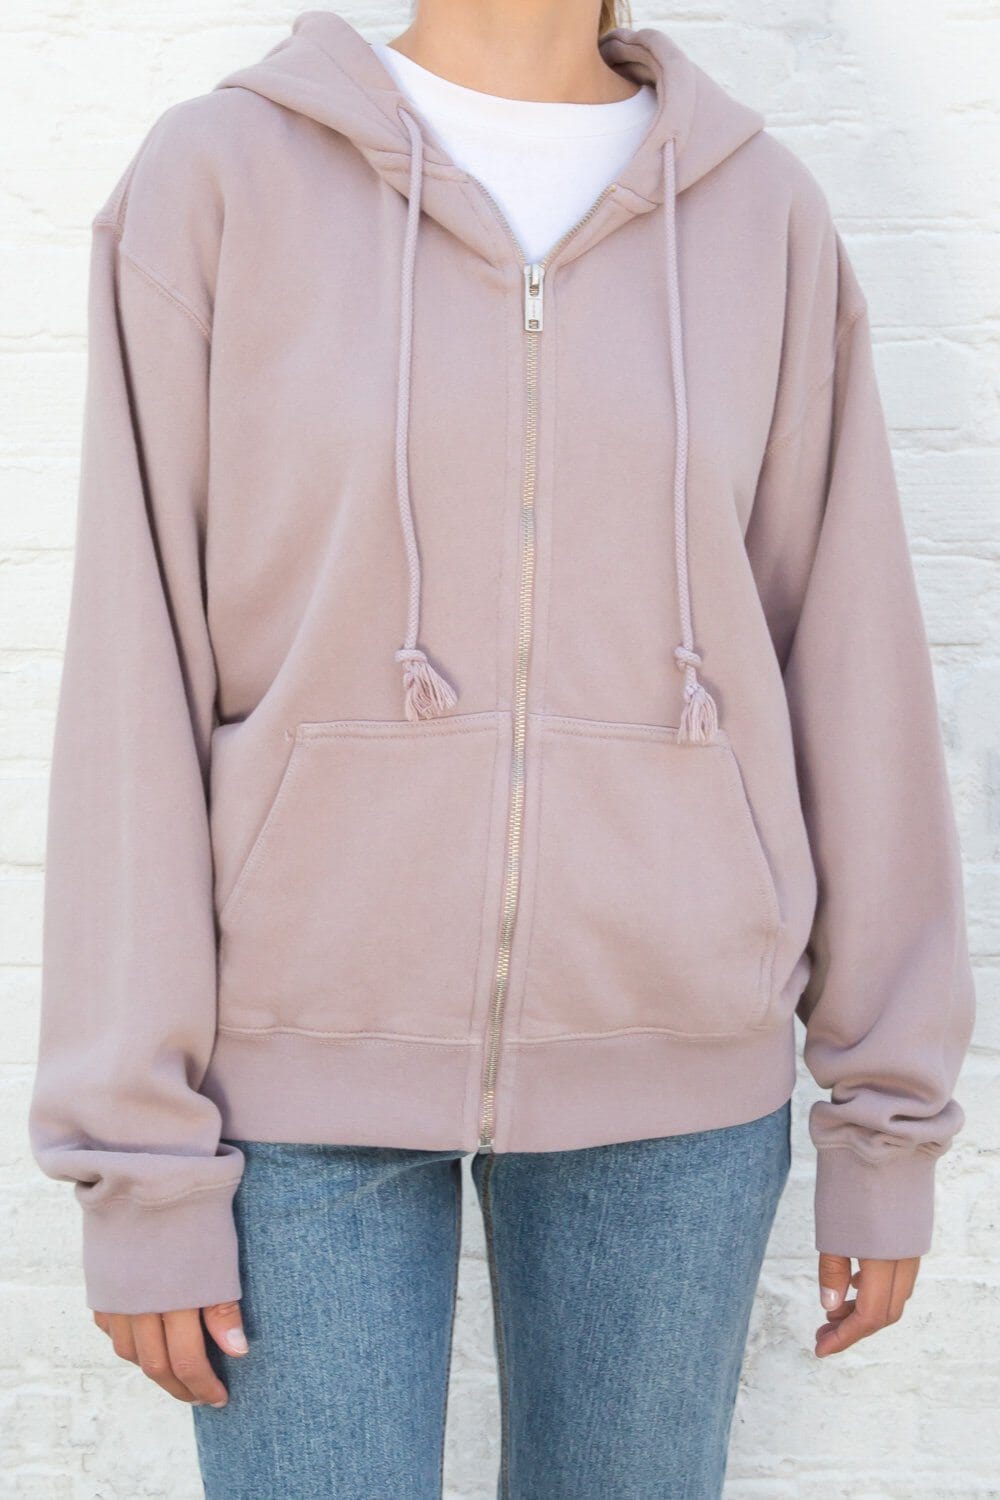 Brandy Melville Christy Hoodie Pink - $38 (20% Off Retail) - From